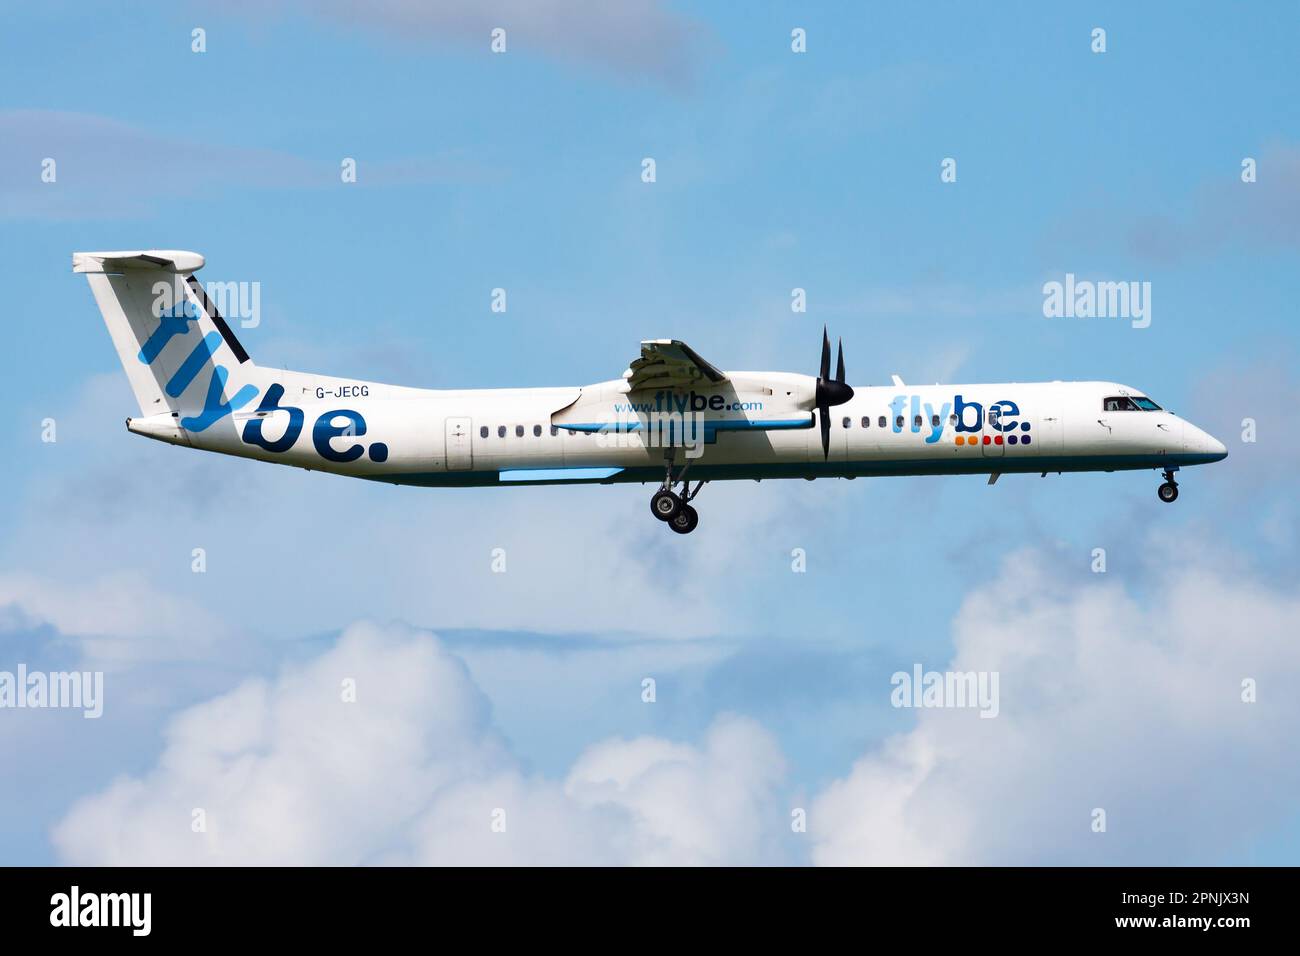 Amsterdam, Netherlands - August 15, 2014: Flybe passenger plane at airport. Schedule flight travel. Aviation and aircraft. Air transport. Global inter Stock Photo